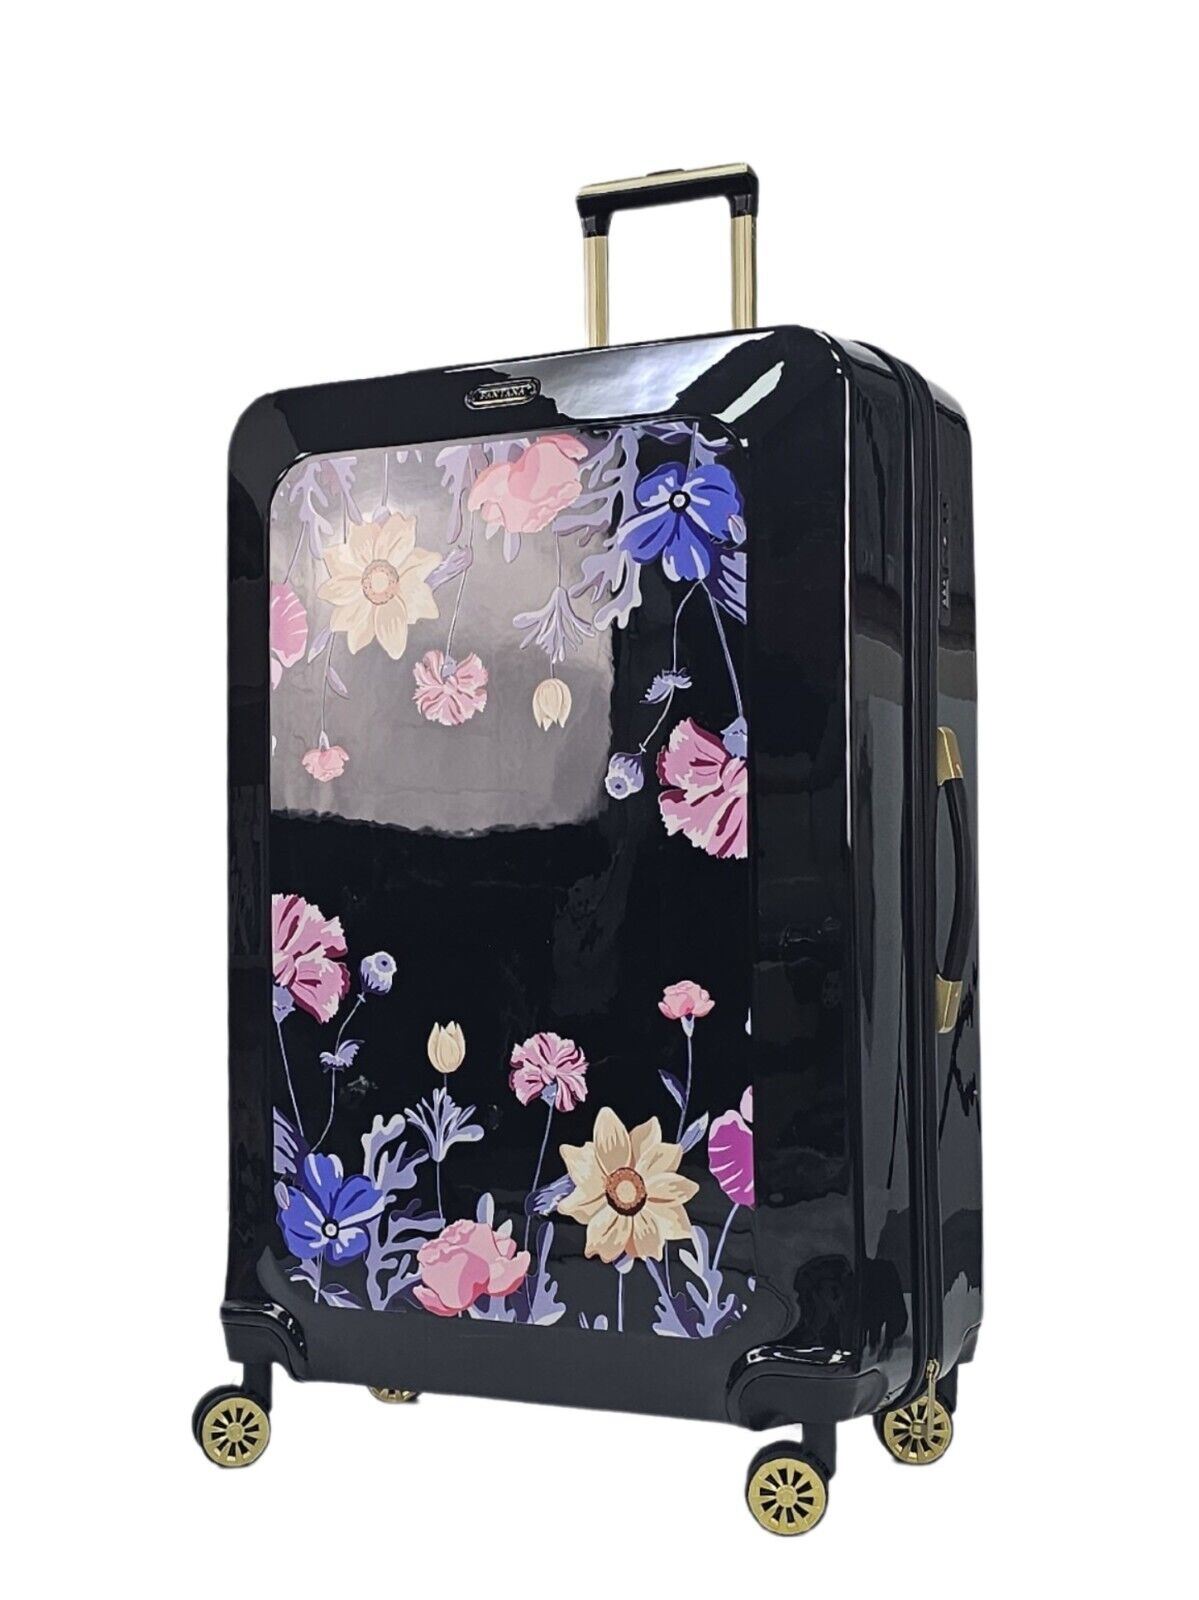 Butler Extra Large Hard Shell Suitcase in Black